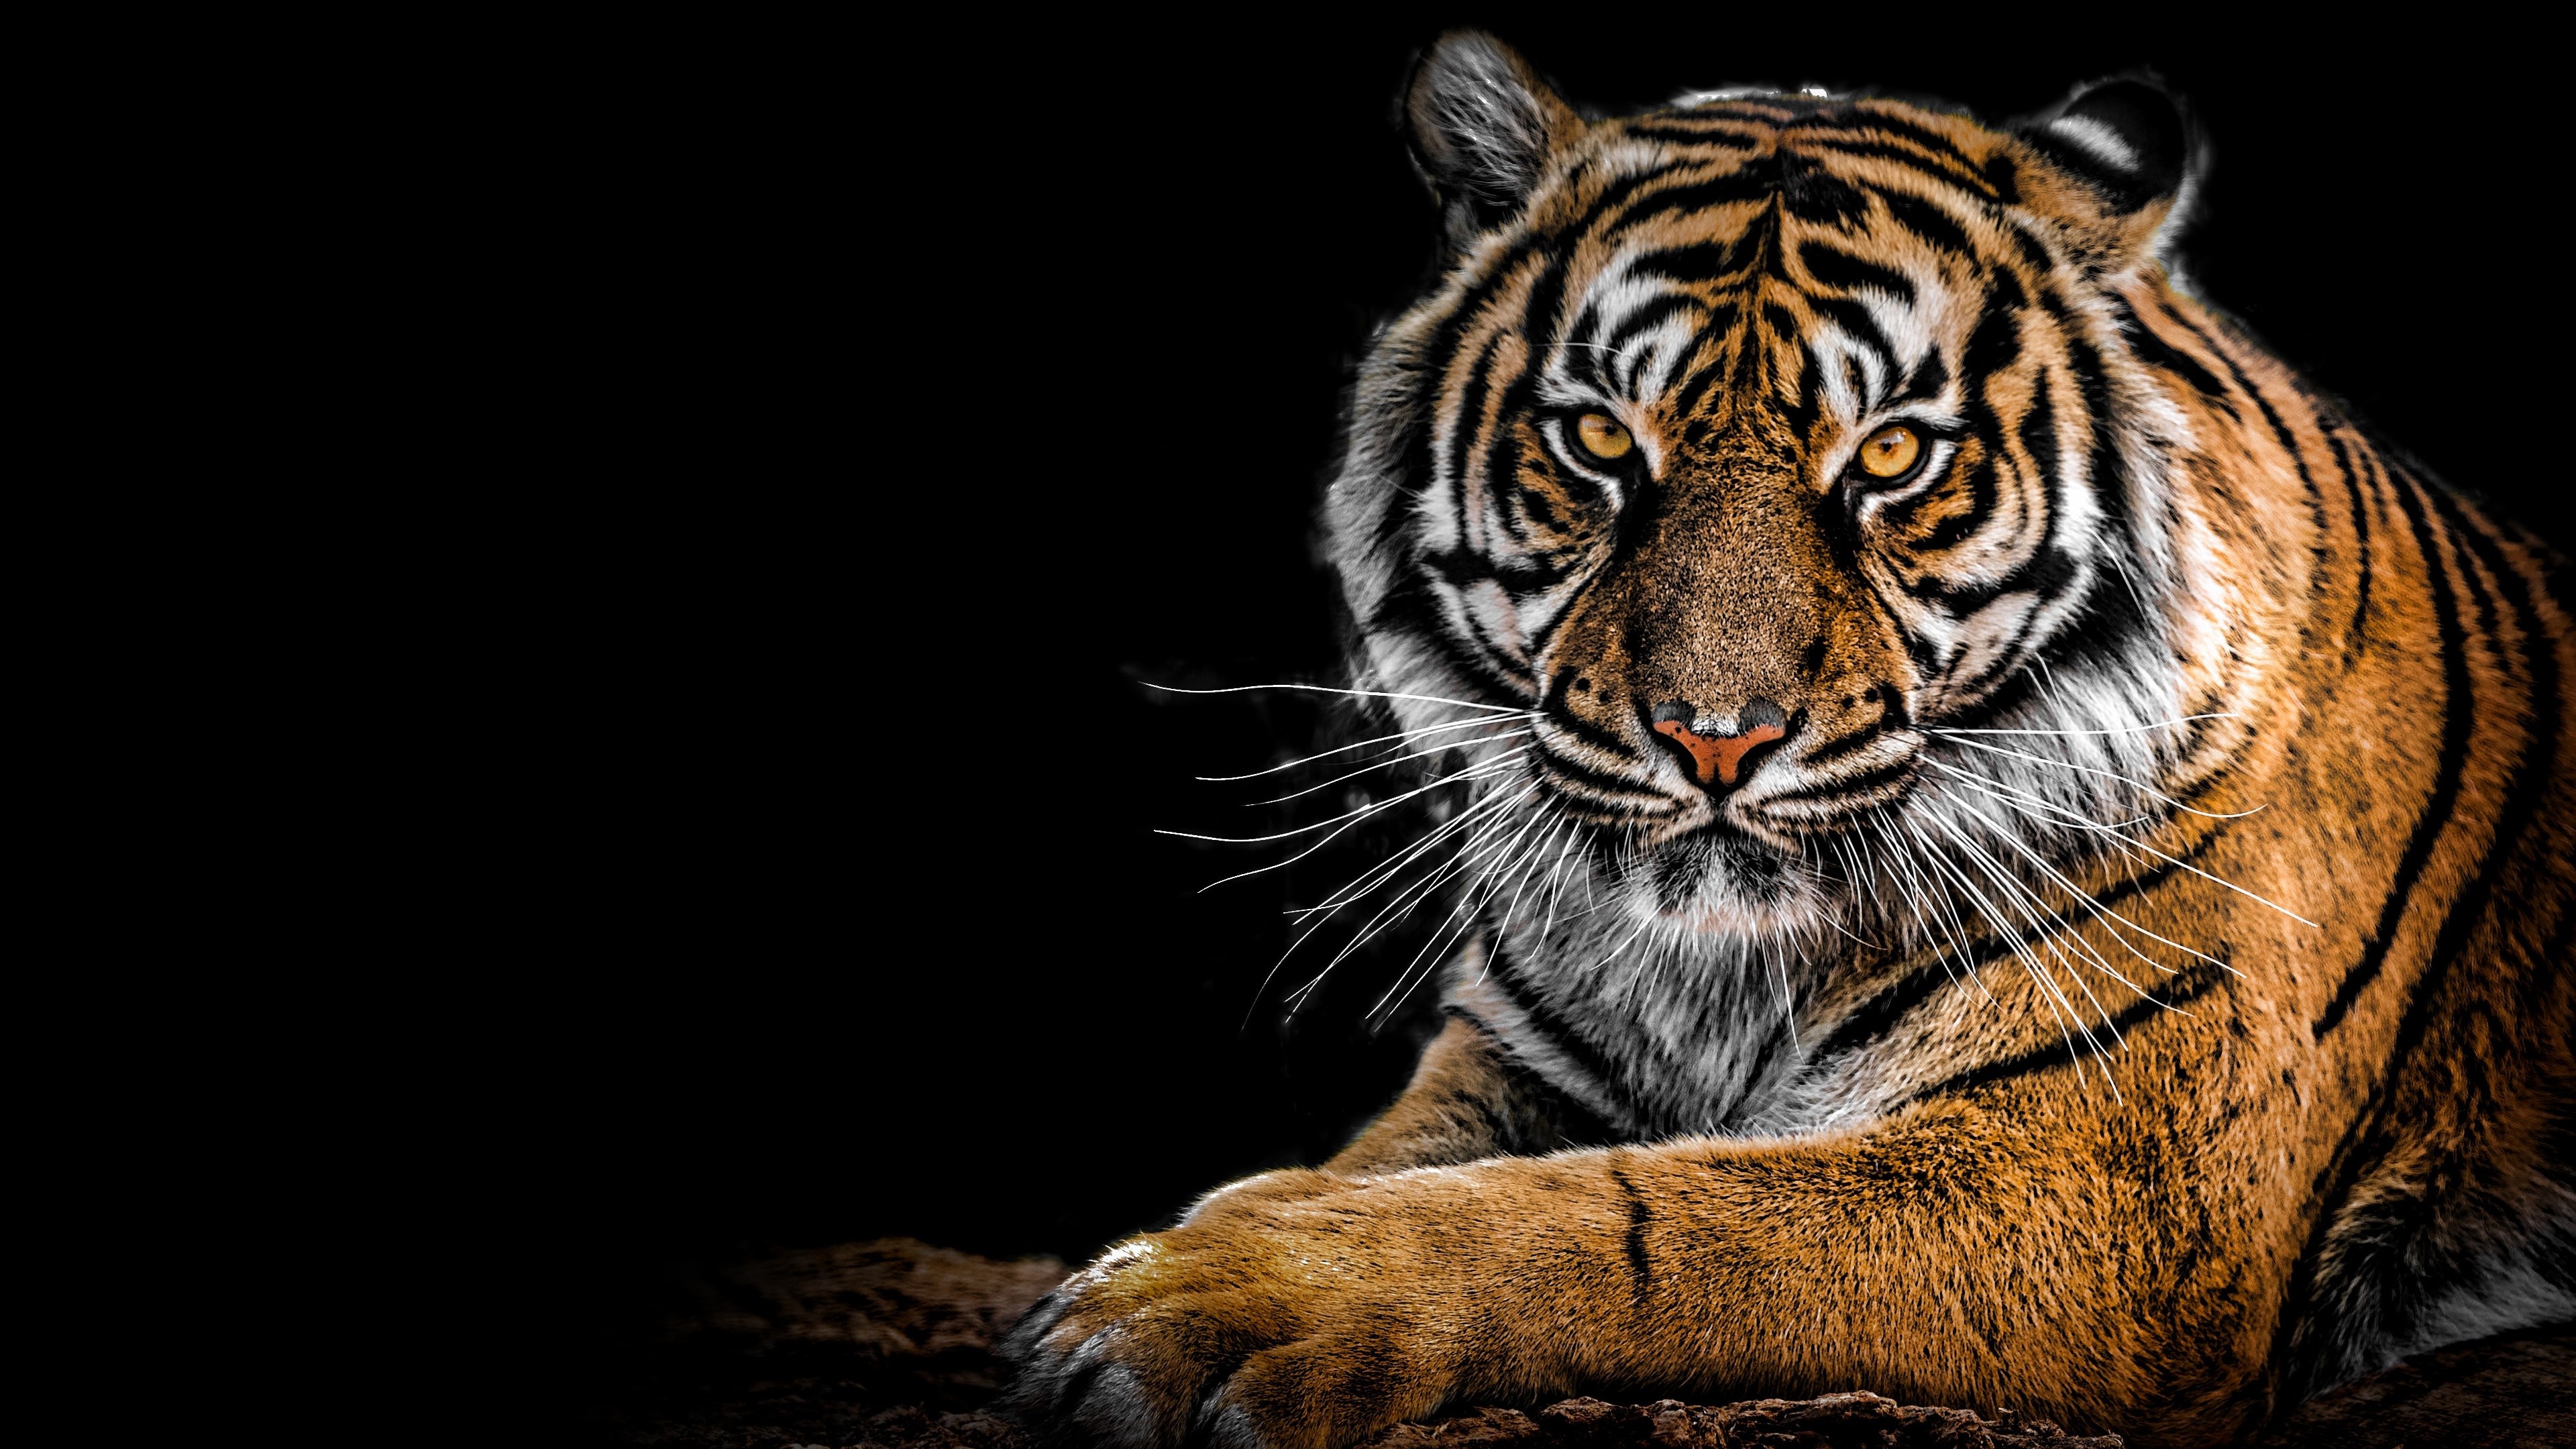 Download Tigers wallpapers for mobile phone free Tigers HD pictures